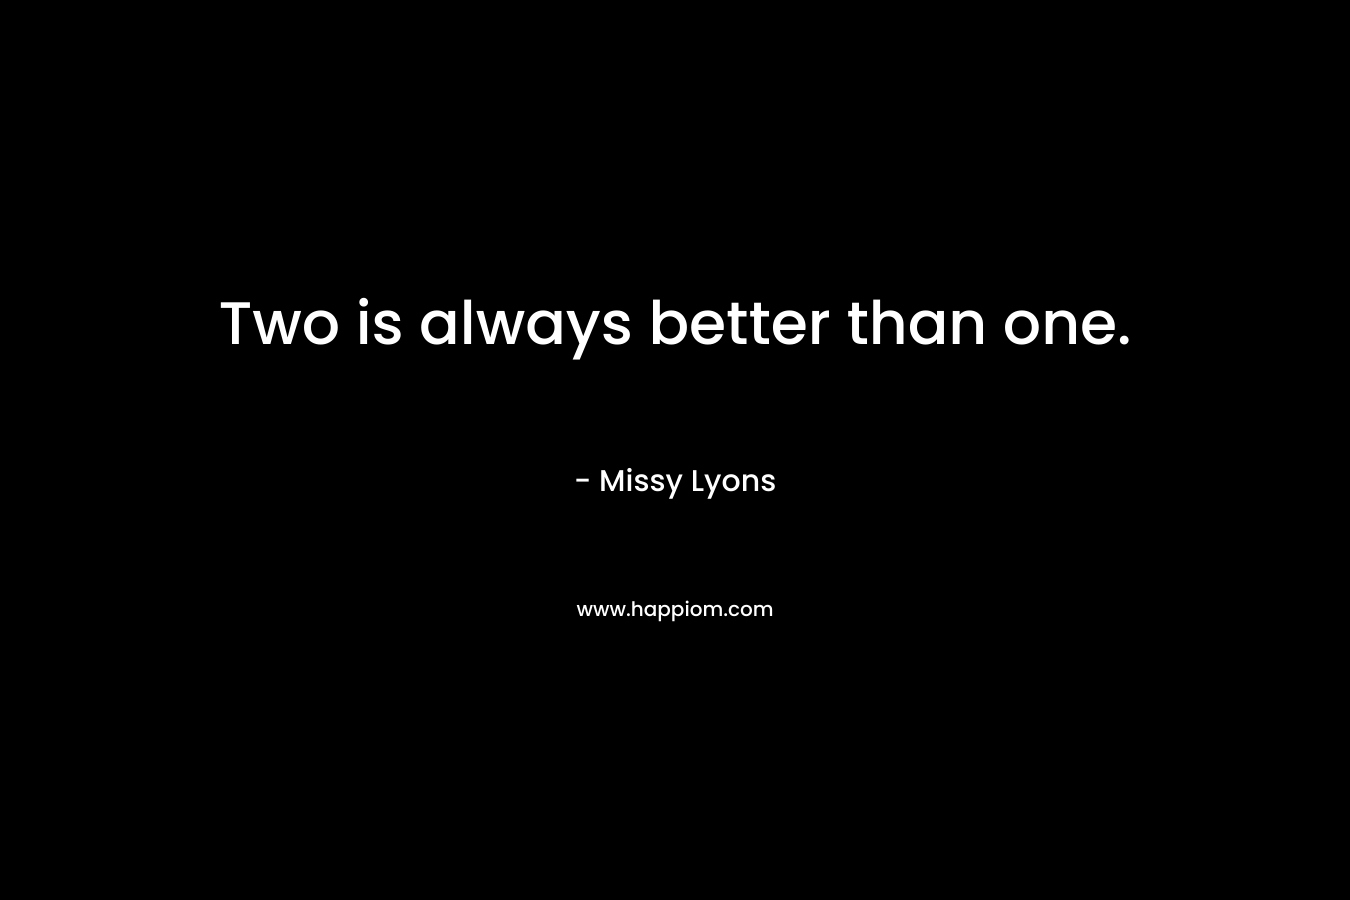 Two is always better than one.